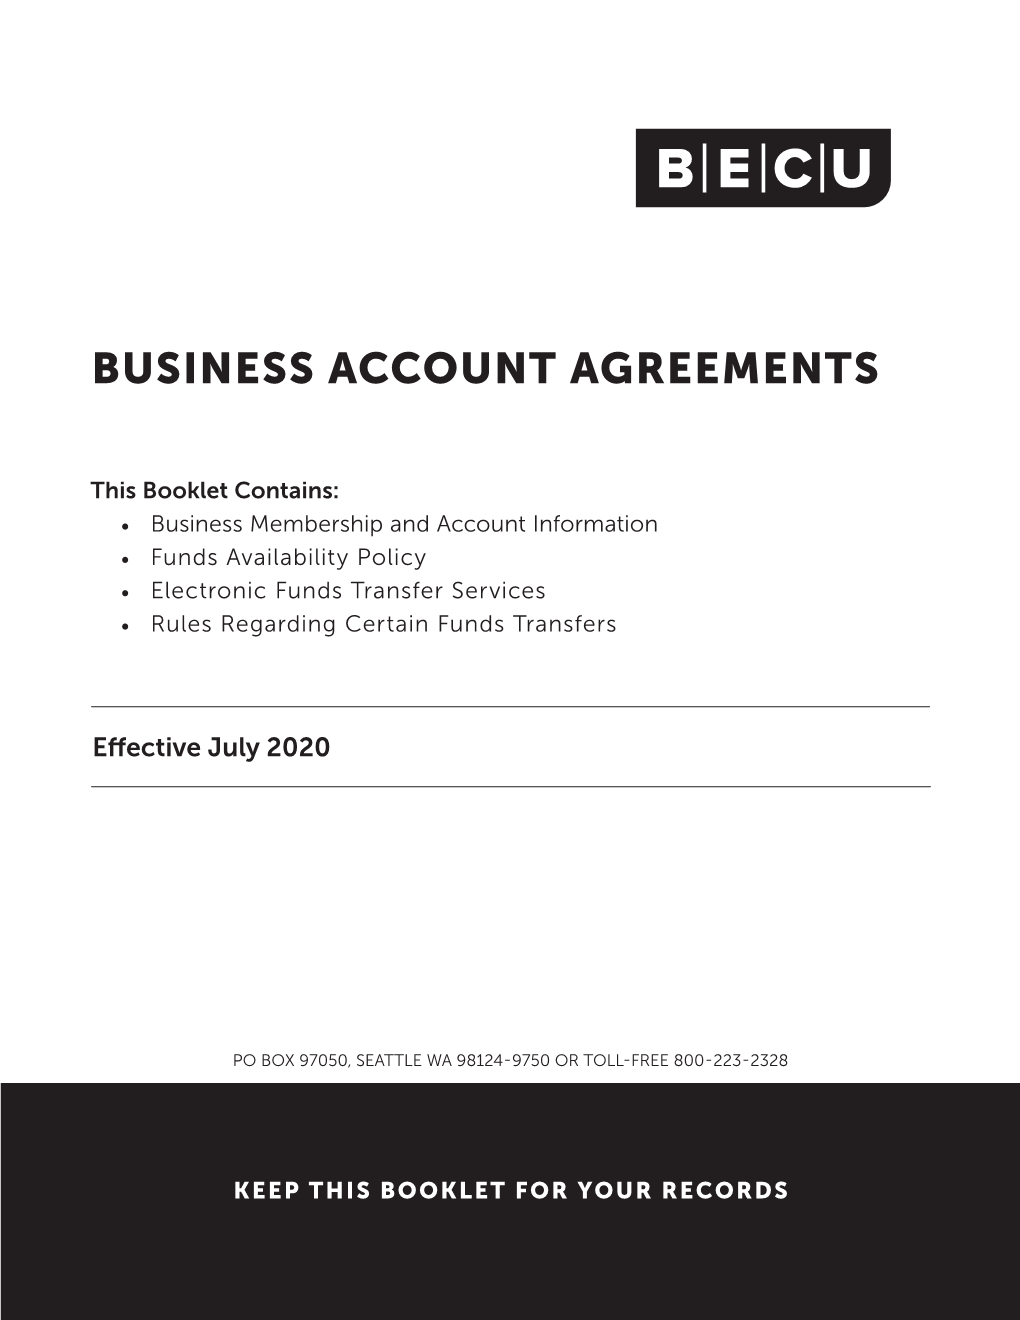 BECU Business Account Agreements